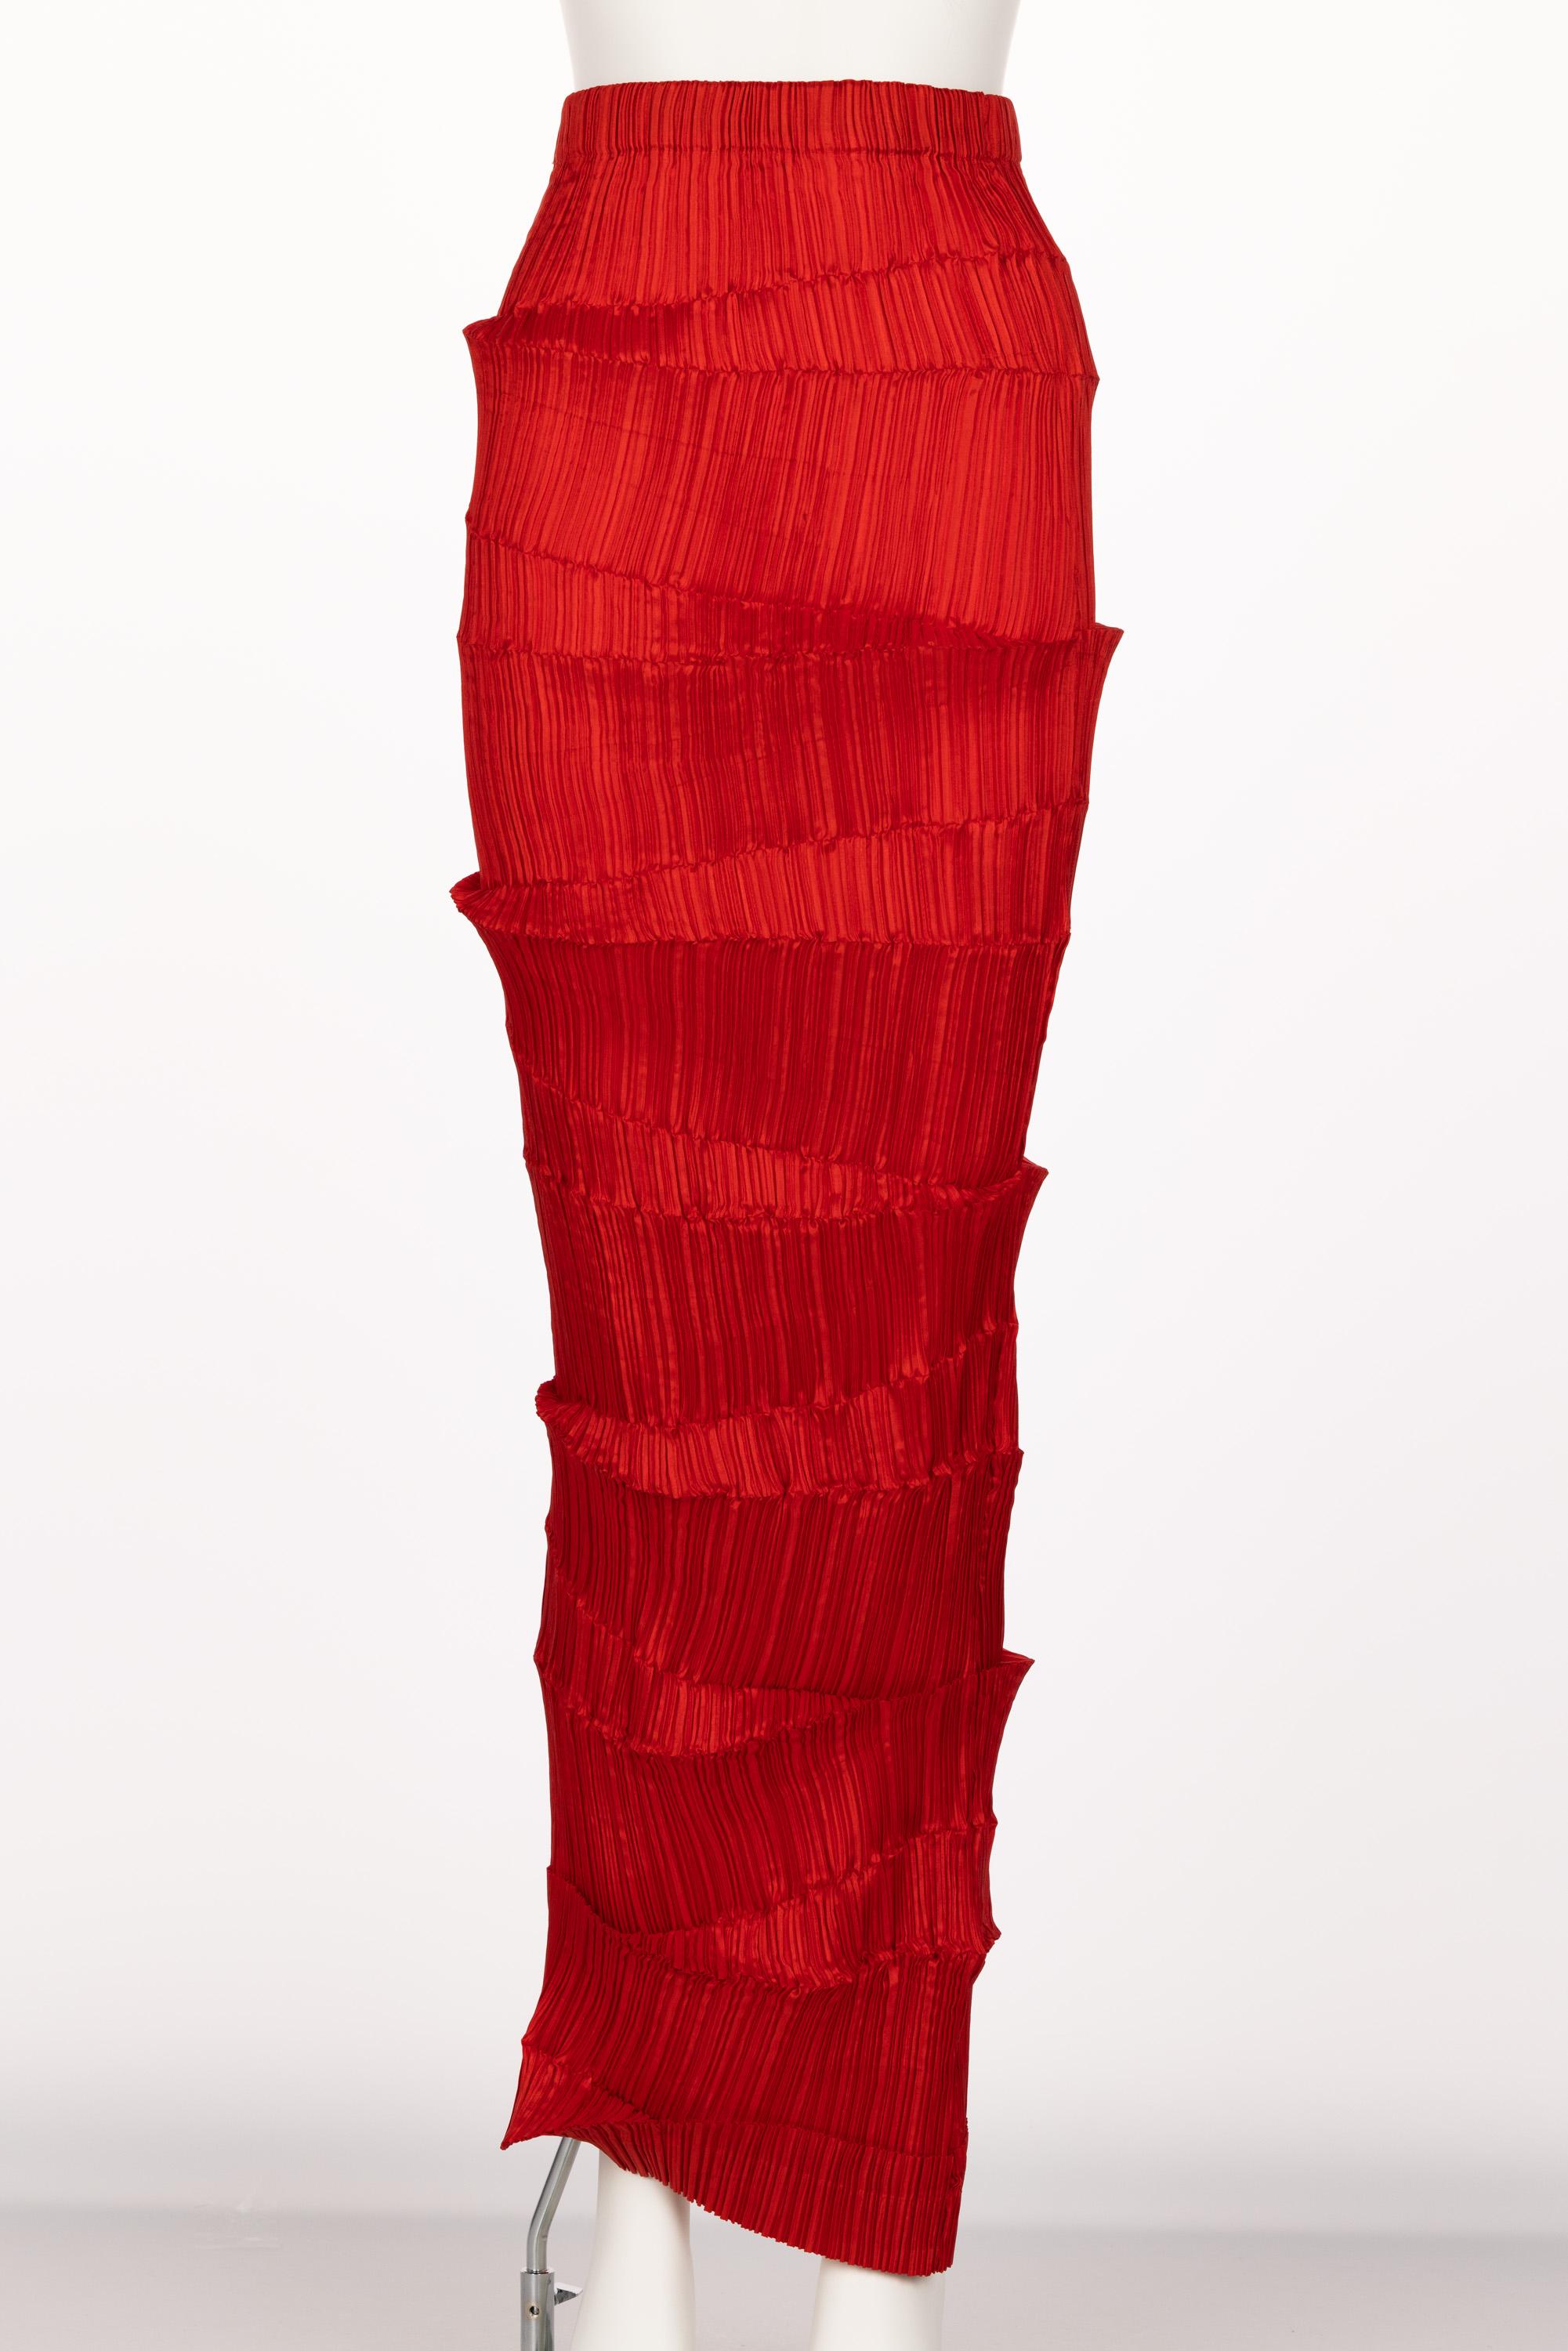 Issey Miyake Pleated Red Maxi Skirt 1990s 2